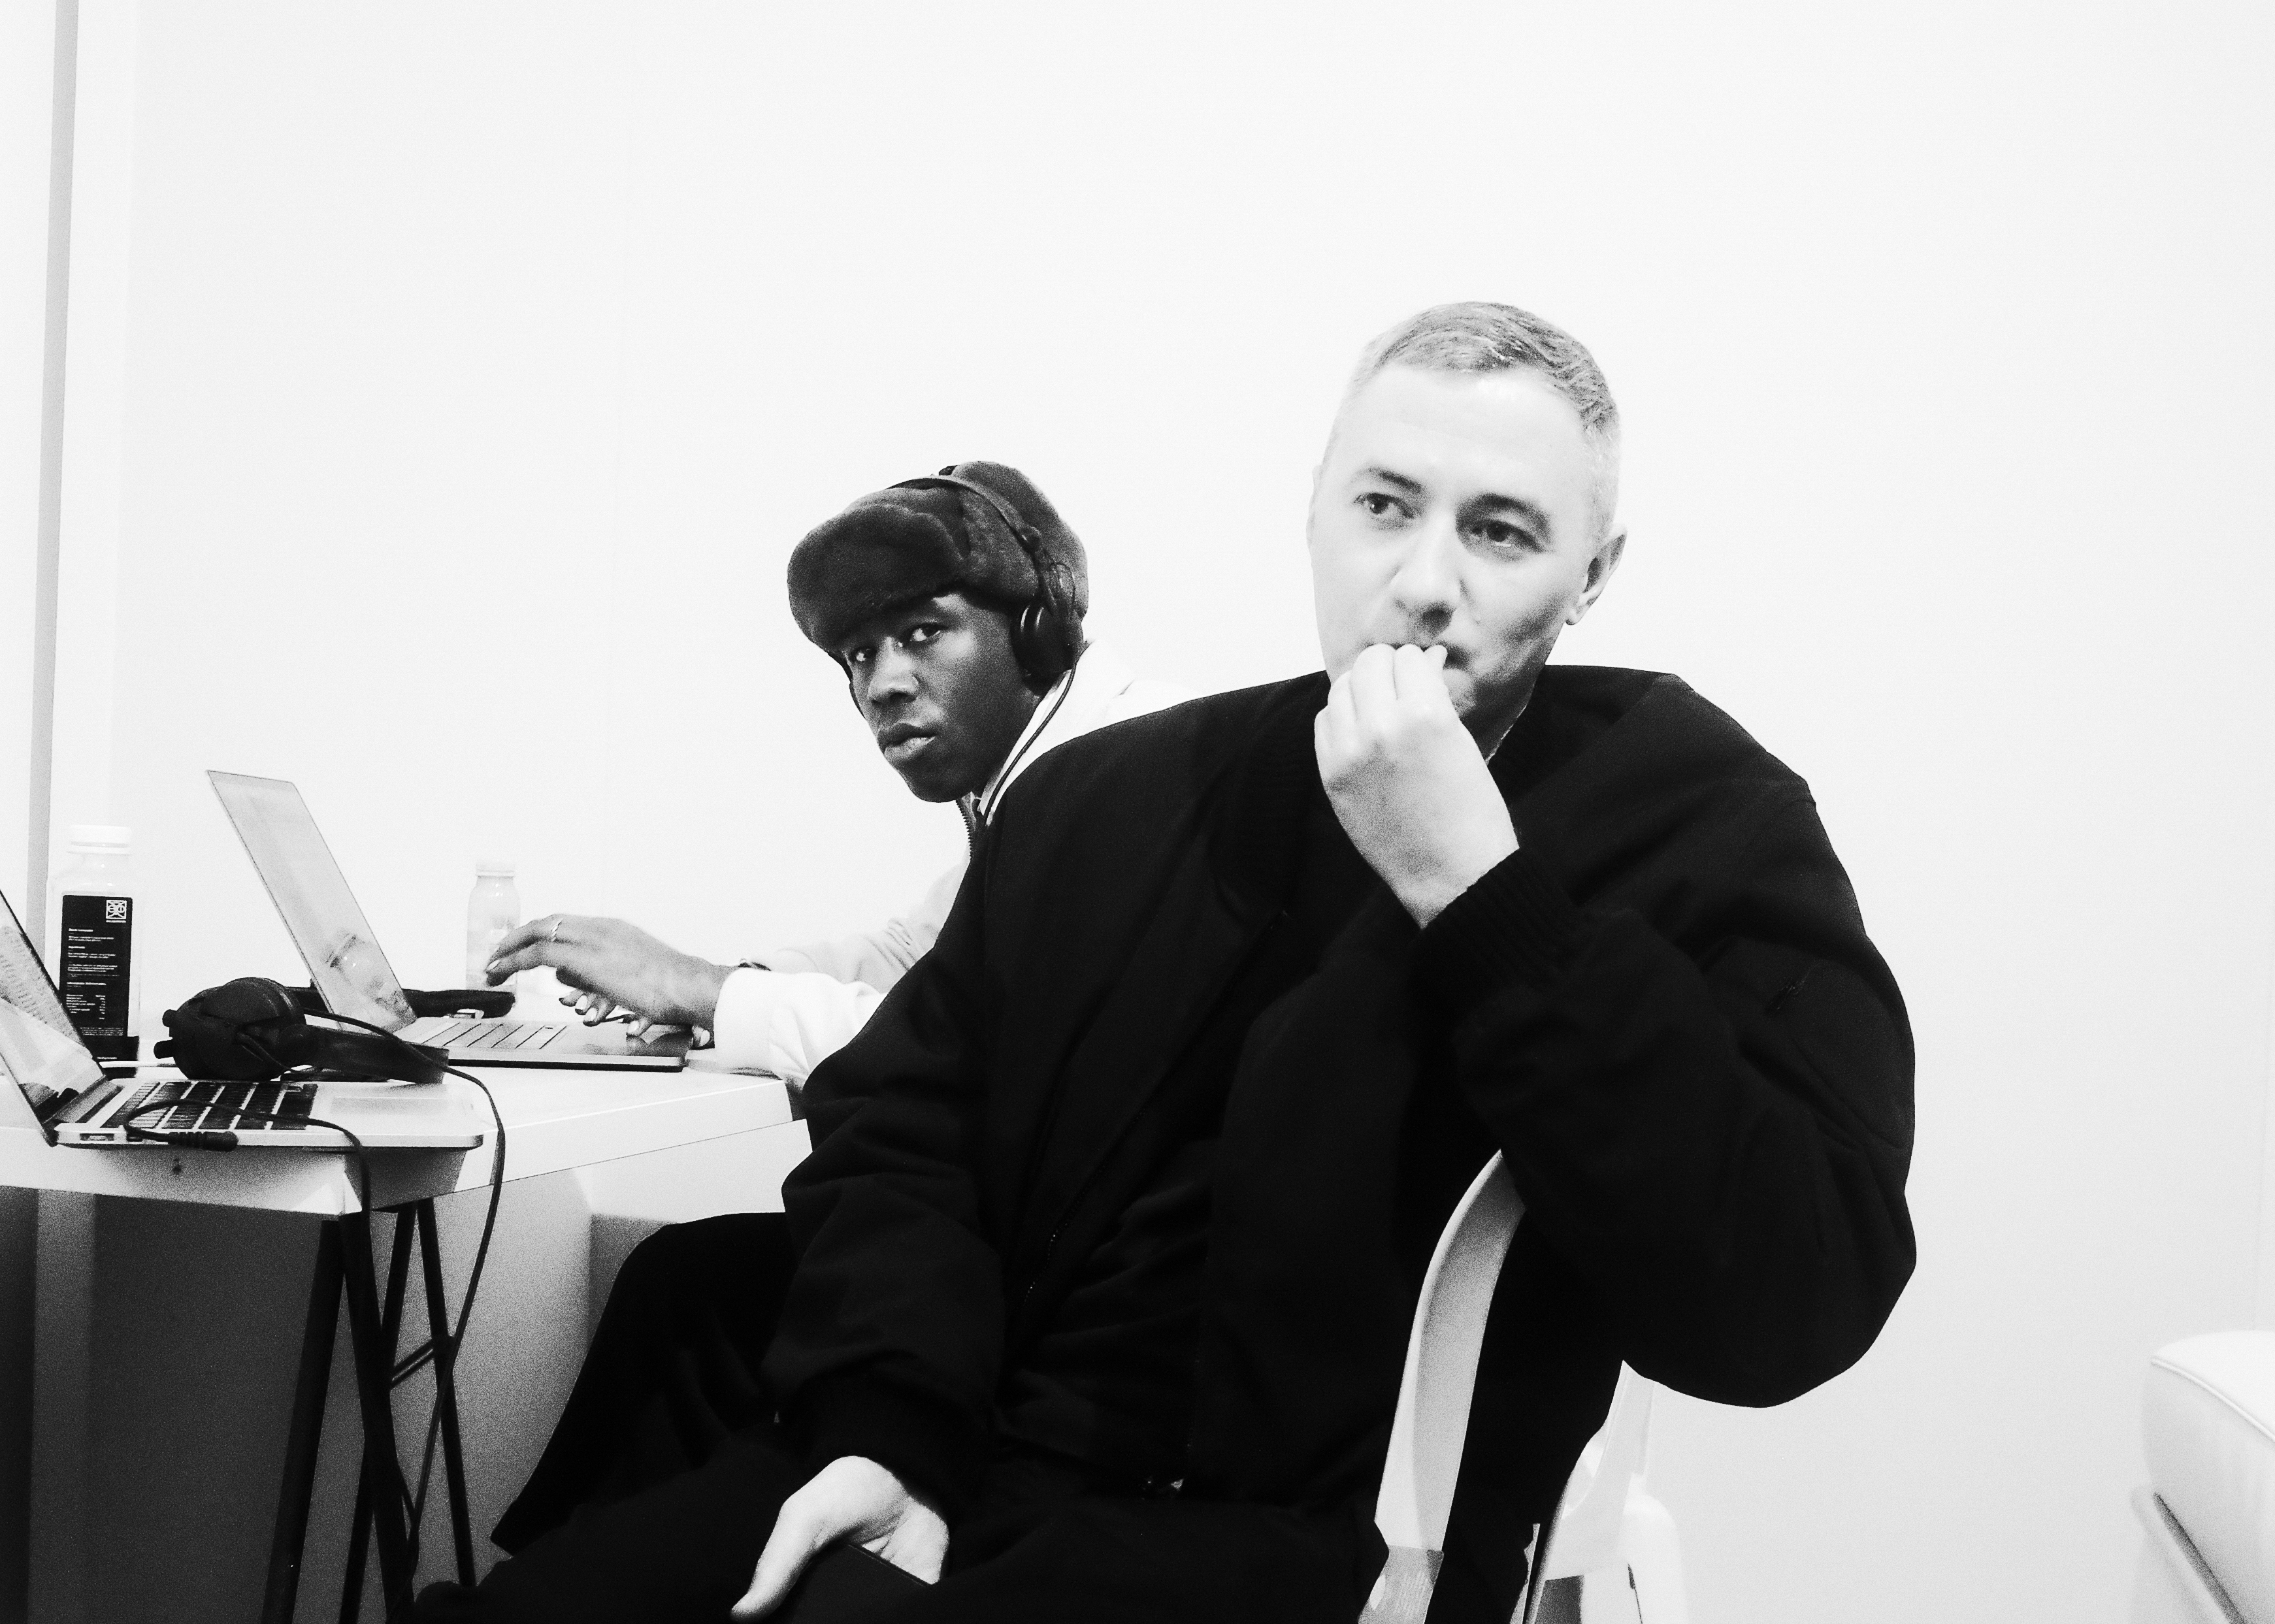 Benji B on soundtracking Virgil Abloh's final show with Tyler, the